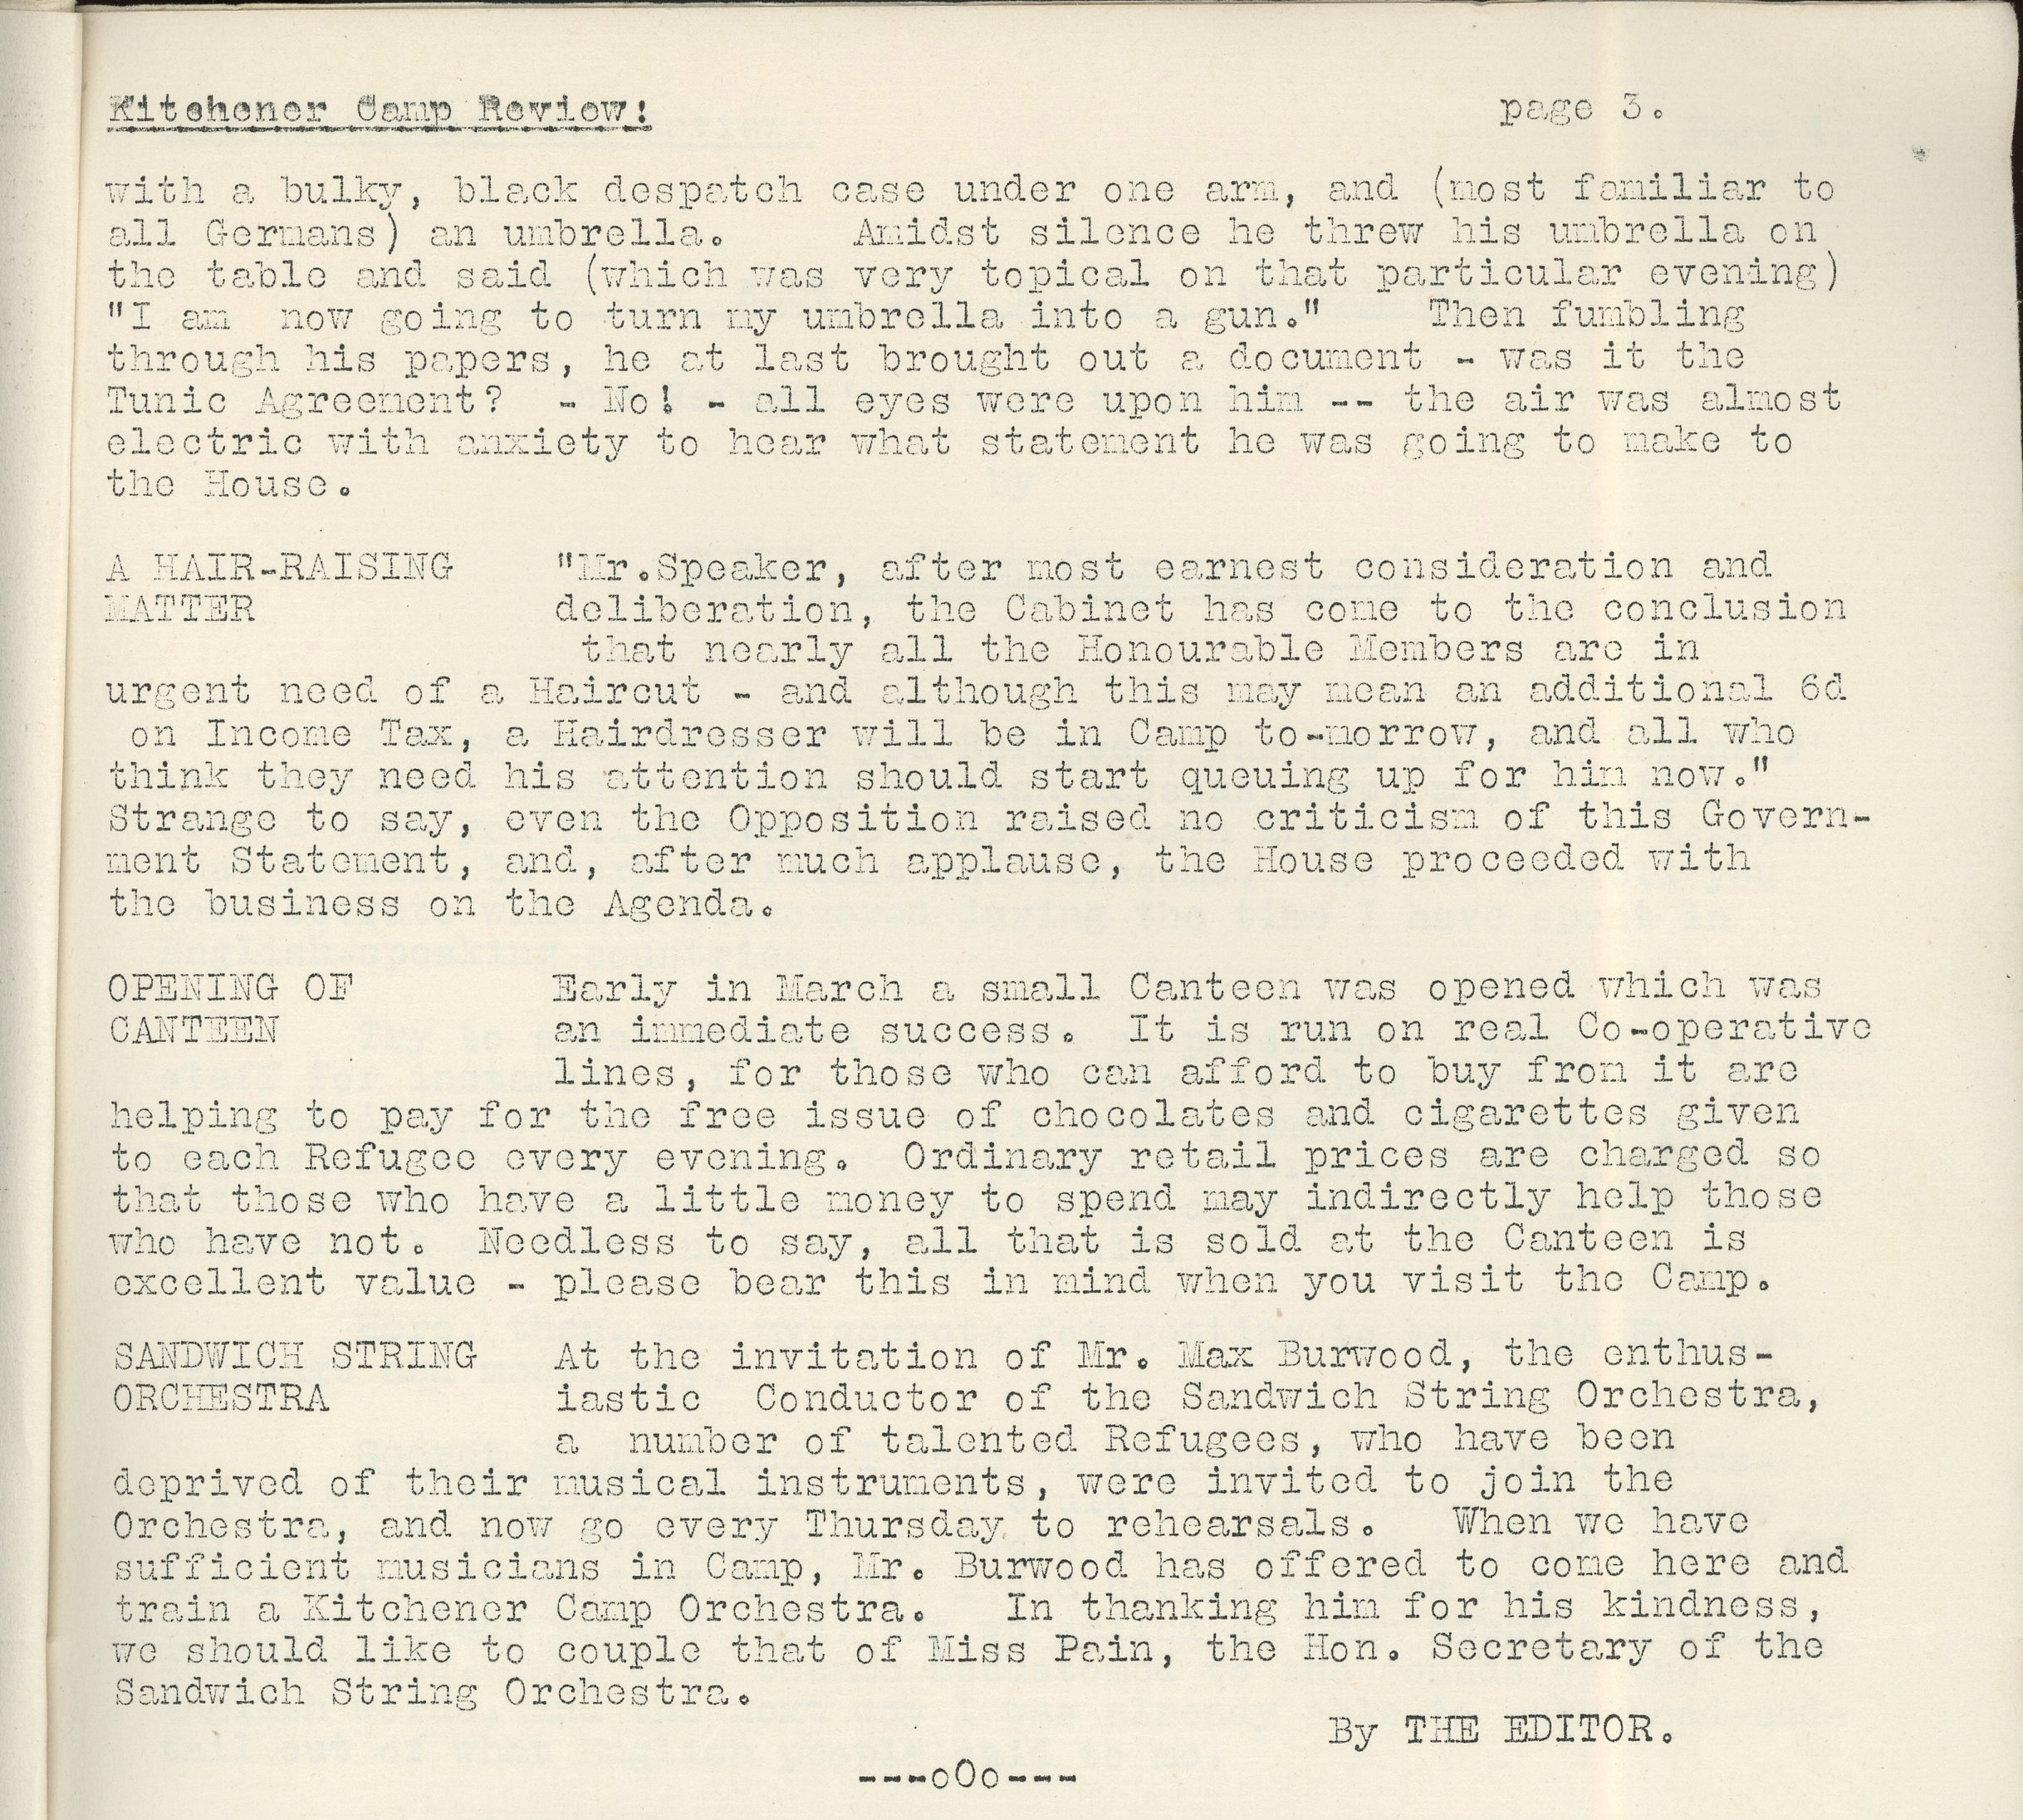 Kitchener Camp Review, April 1939, page 3, top